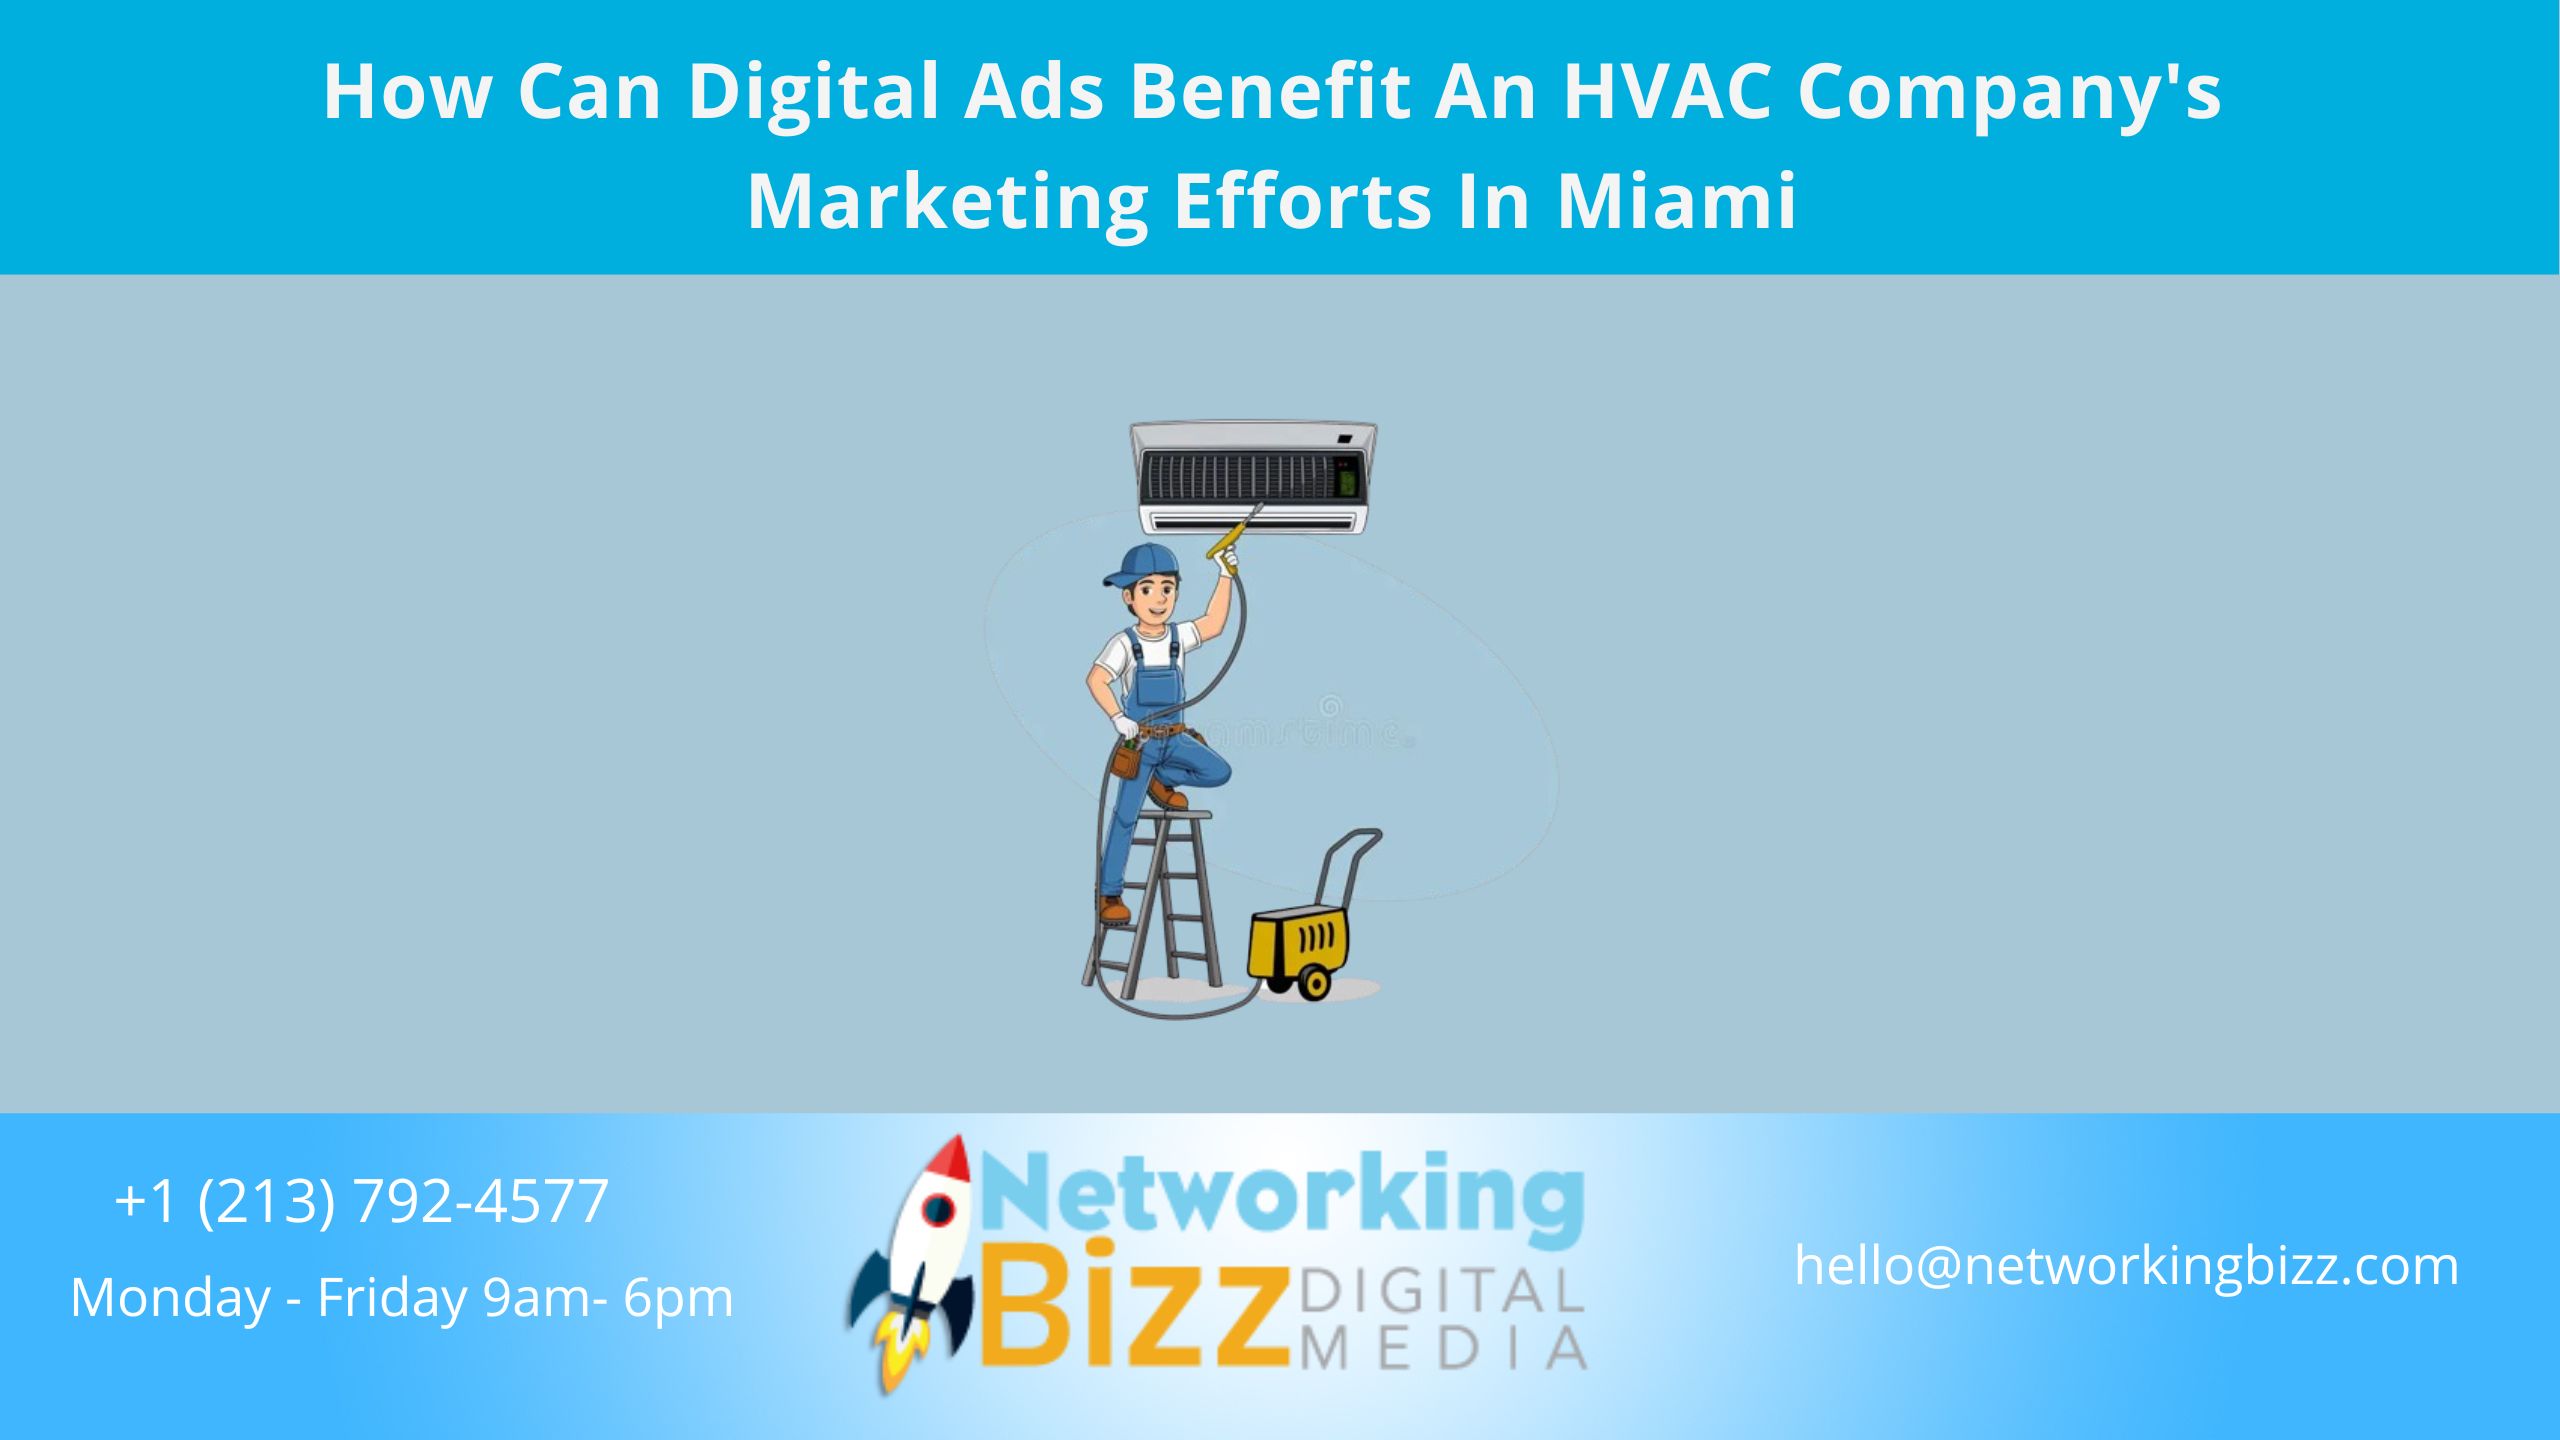 How Can Digital Ads Benefit An HVAC Company’s Marketing Efforts In Miami